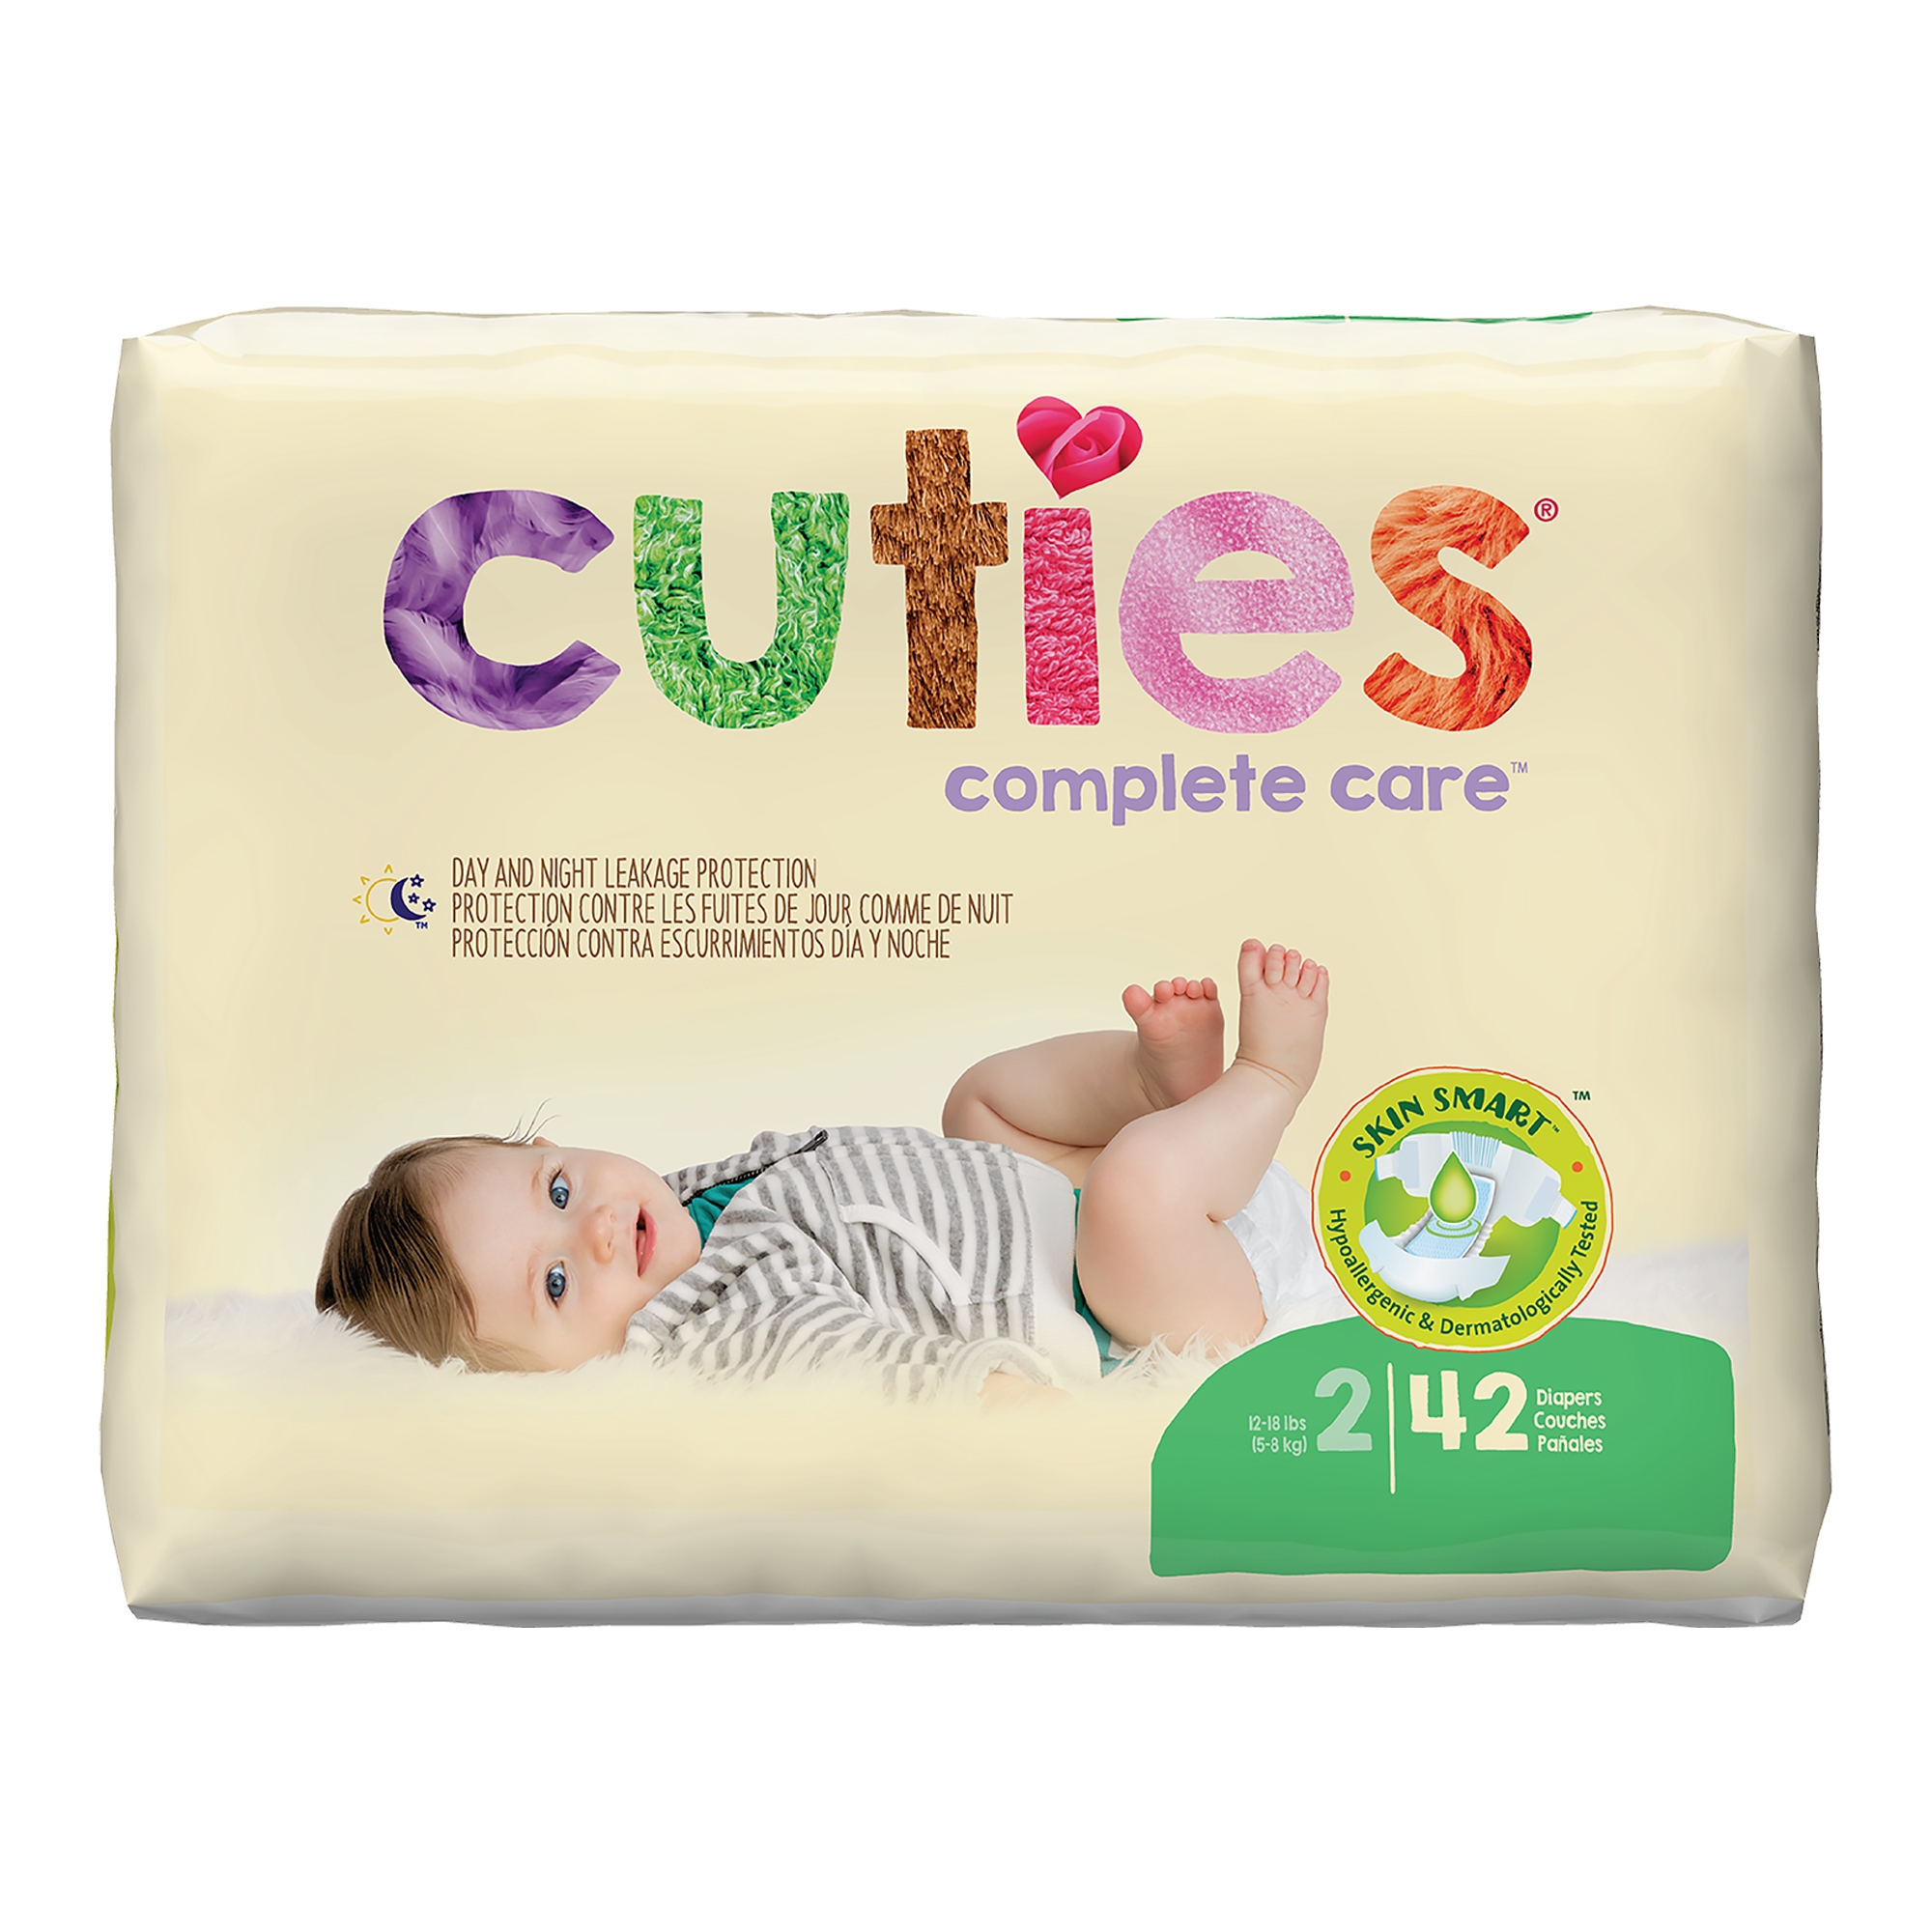 Shop for Cuties Diapers